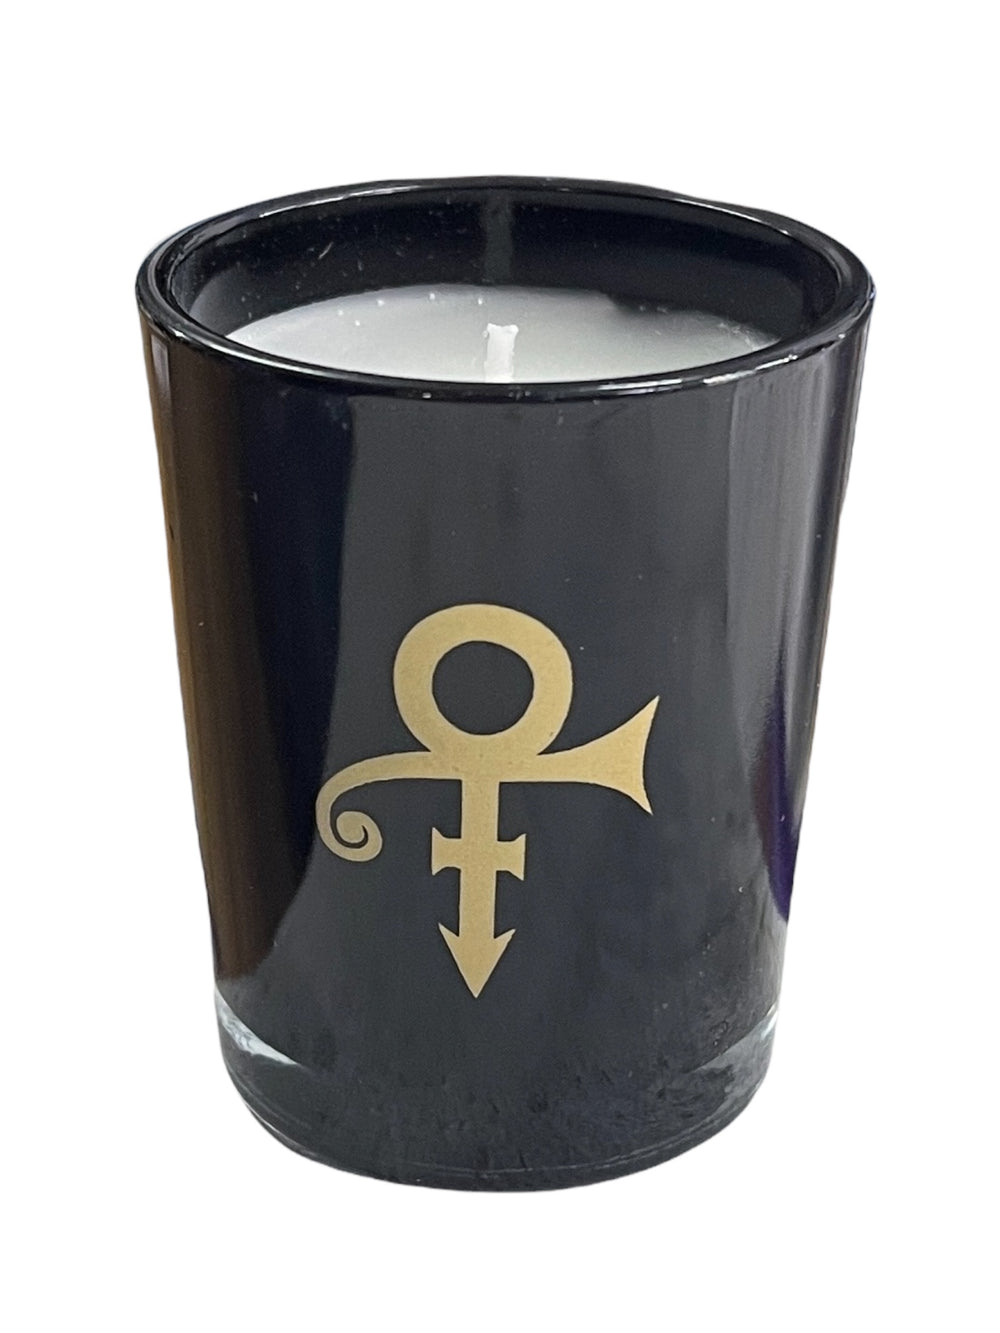 Prince – Gold Love Symbol Candle XCLUSIVE Official Merchandise